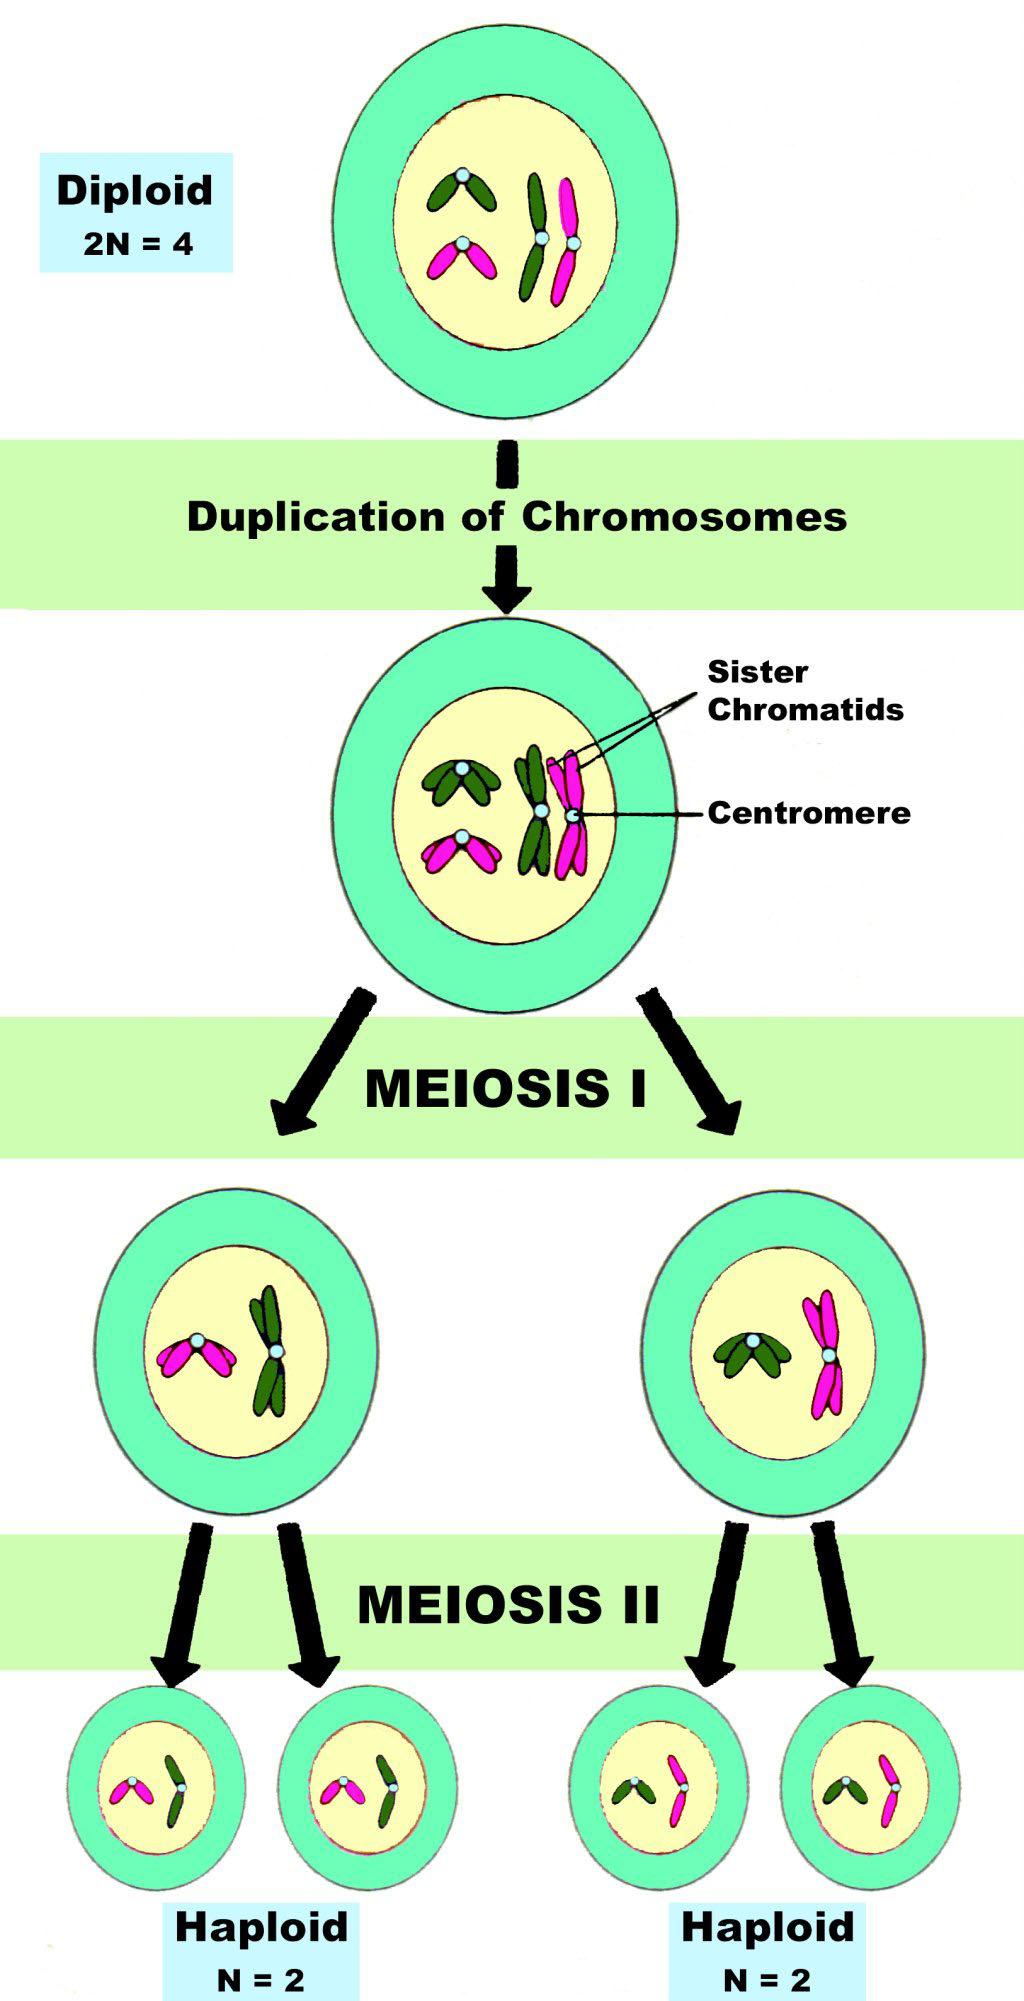 Figure 20-6. Showing one replication and two divisions of chromatin during meiosis. Figure 20-7A shows how 2 divisions result in the production of 4 sperm but only one egg.